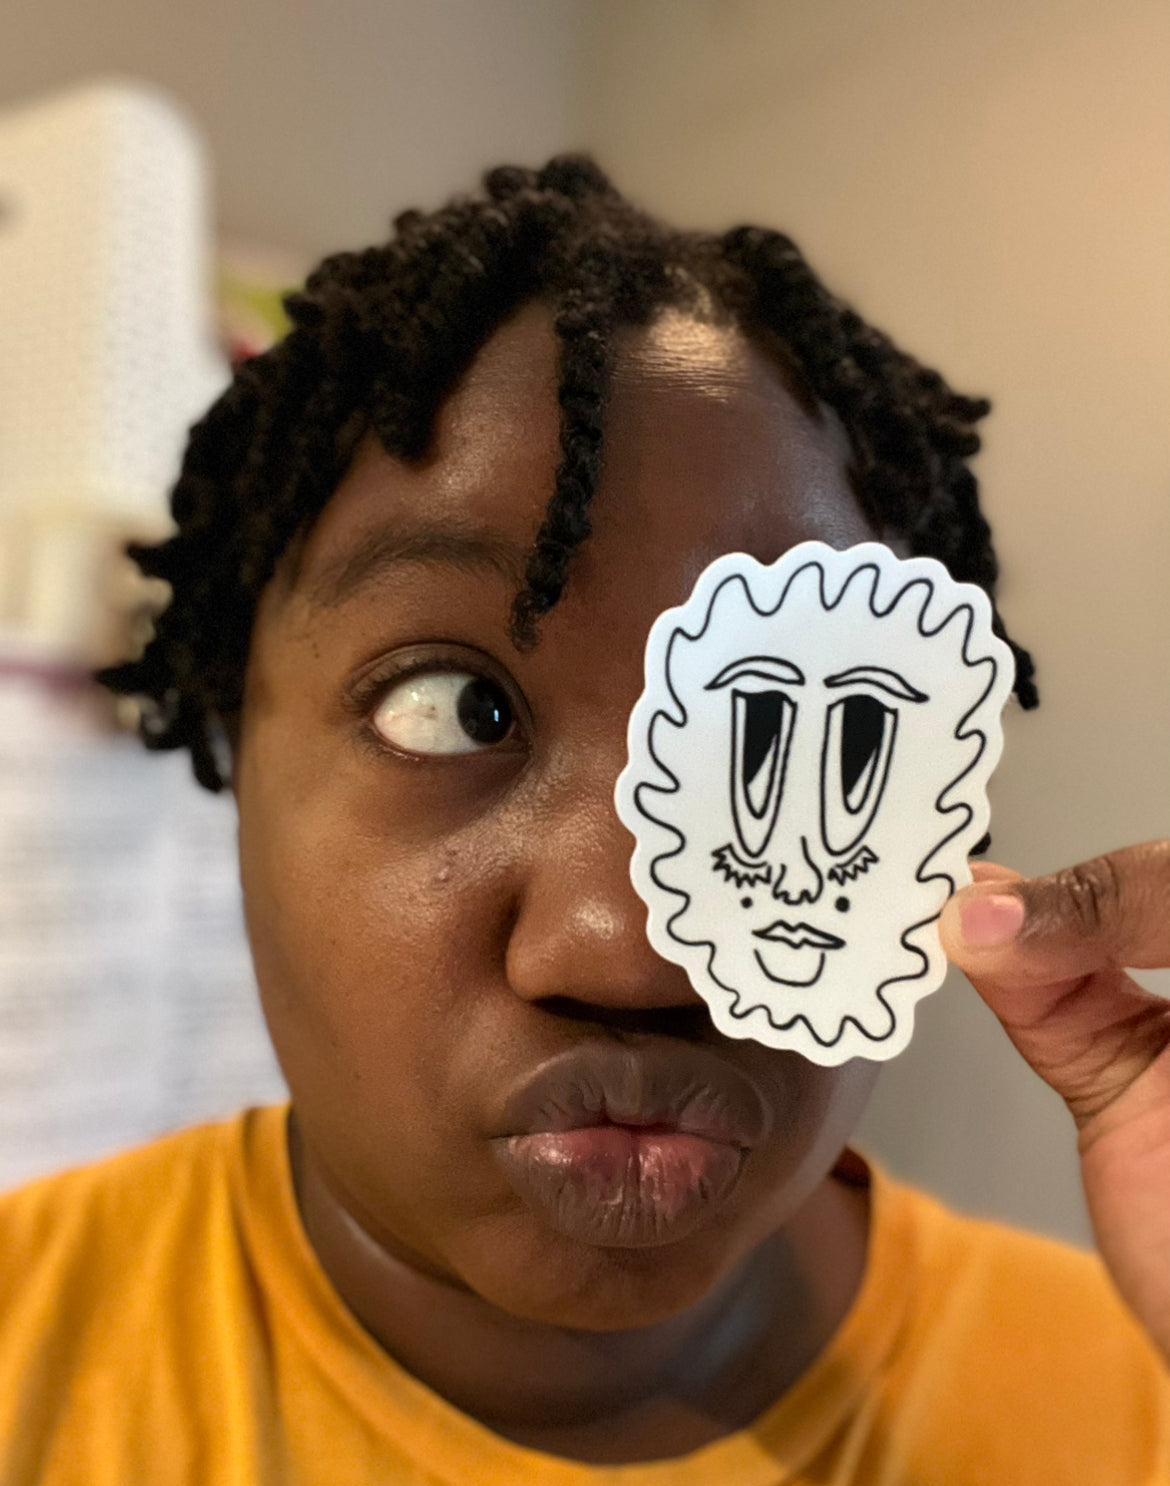 photo of the artist holding up their abstract art sticker depicting a floating face of a black person